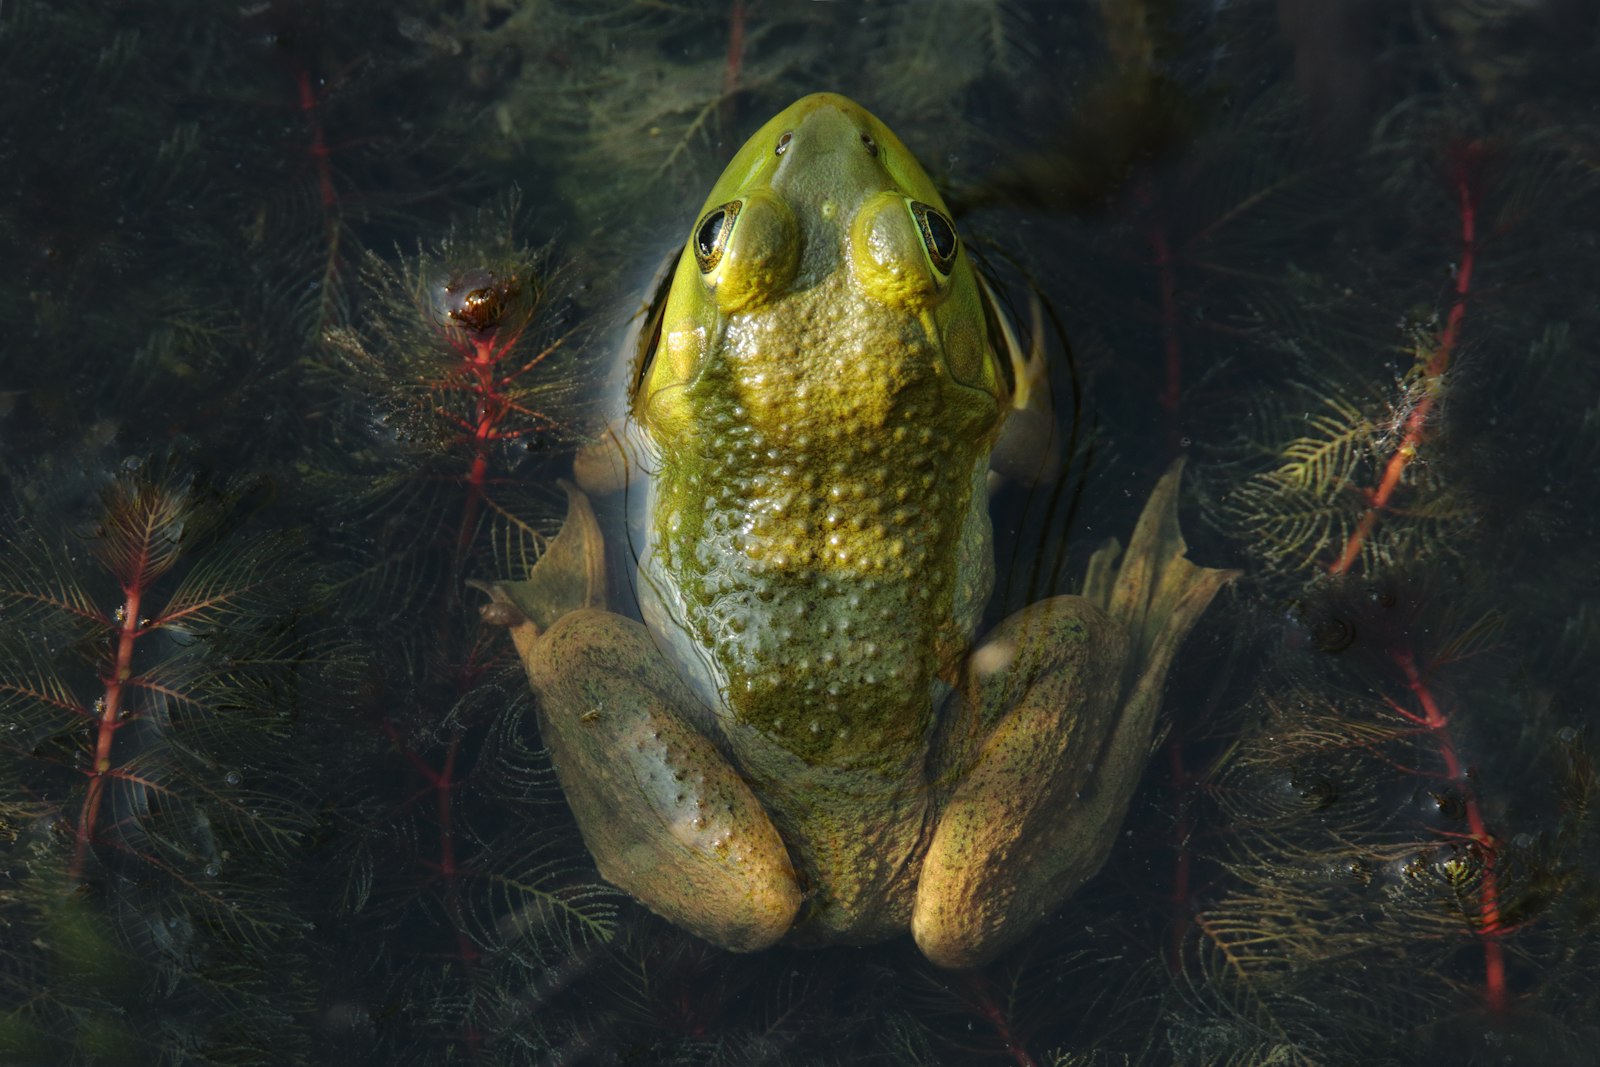 Tamron SP 150-600mm F5-6.3 Di VC USD G2 sample photo. Green frog in water photography